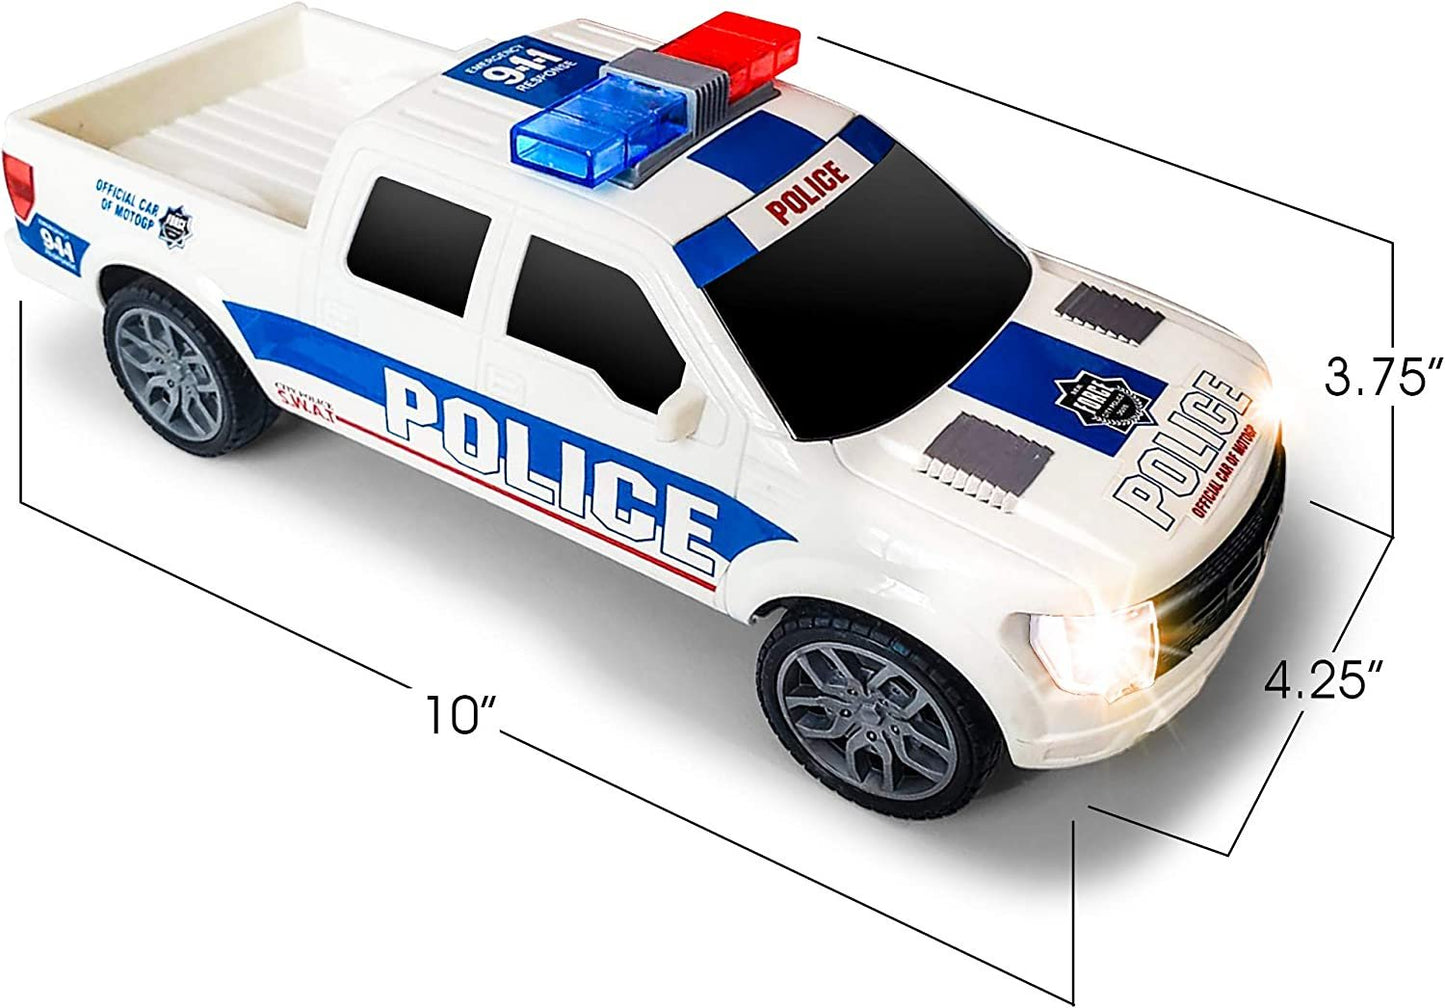 ArtCreativity Police Car Pickup Truck with LED Headlights and Sirens, Light-Up Push and Go Police Car Toy, Police Monster Trucks, Toy Trucks for Kids, Toddler Boy, Toy Cars for 2 Year Old Boys